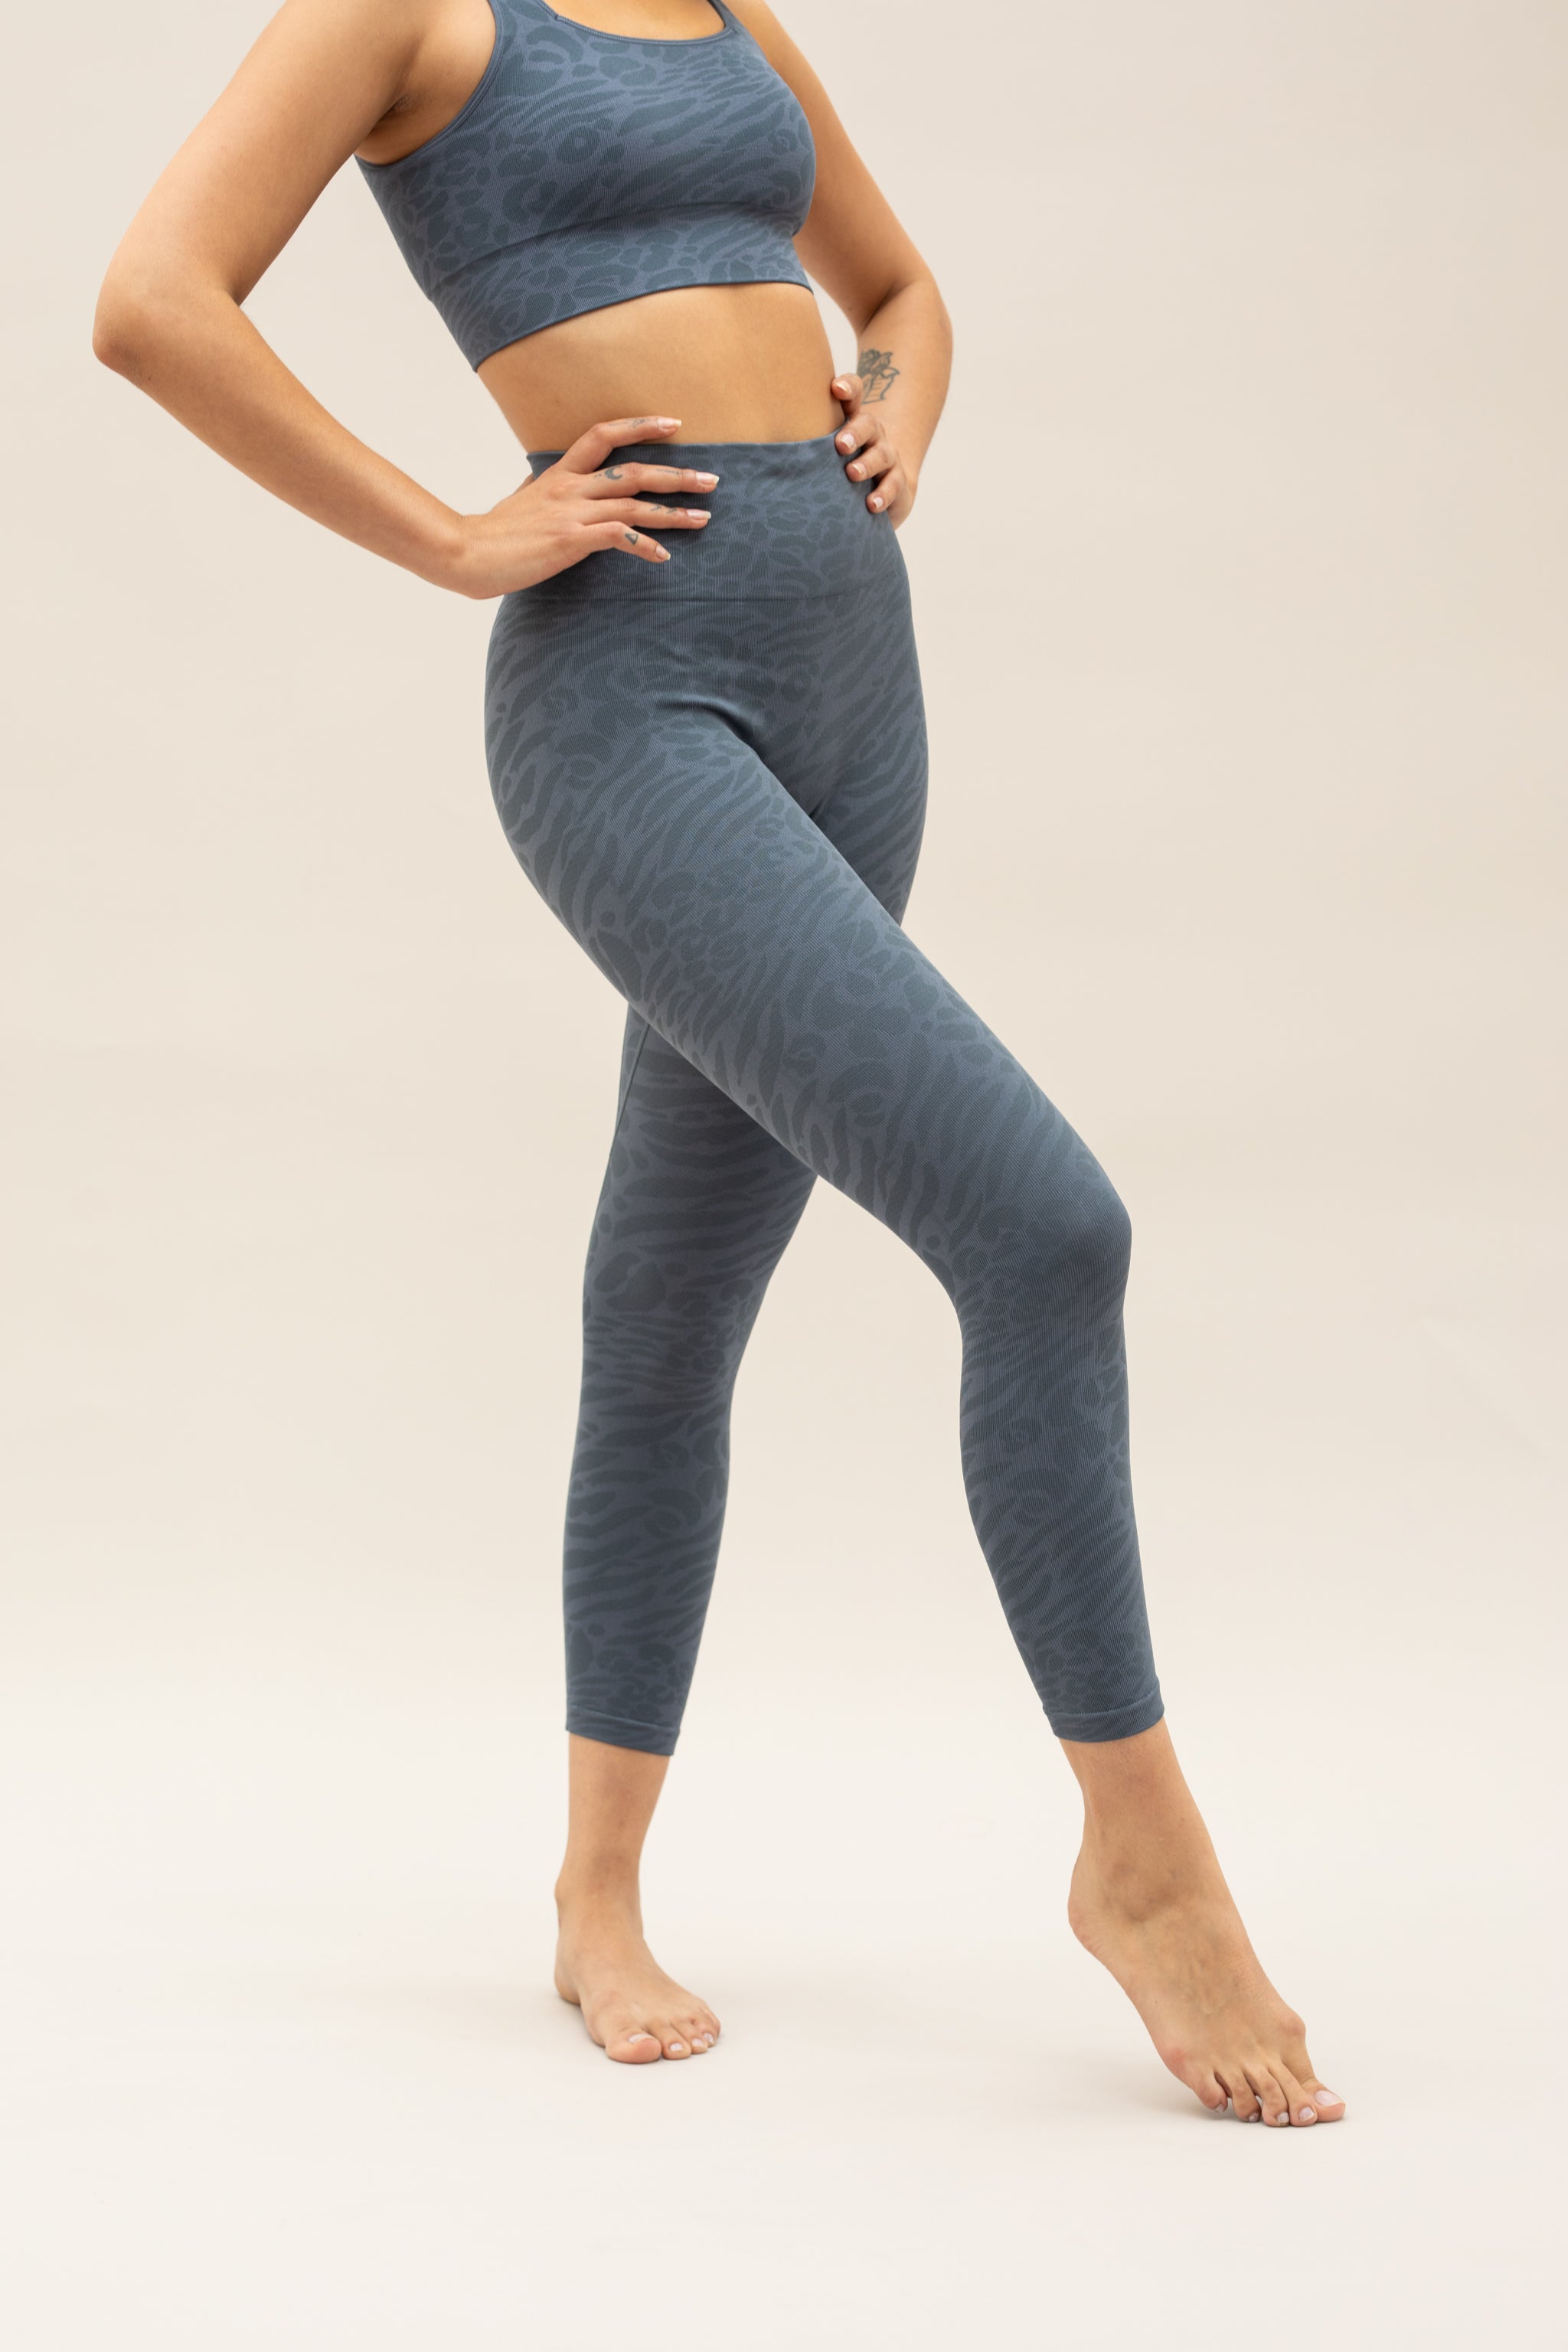 Blue leggings and blue supportive sports bra for sustainable activewear brand, Jilla.